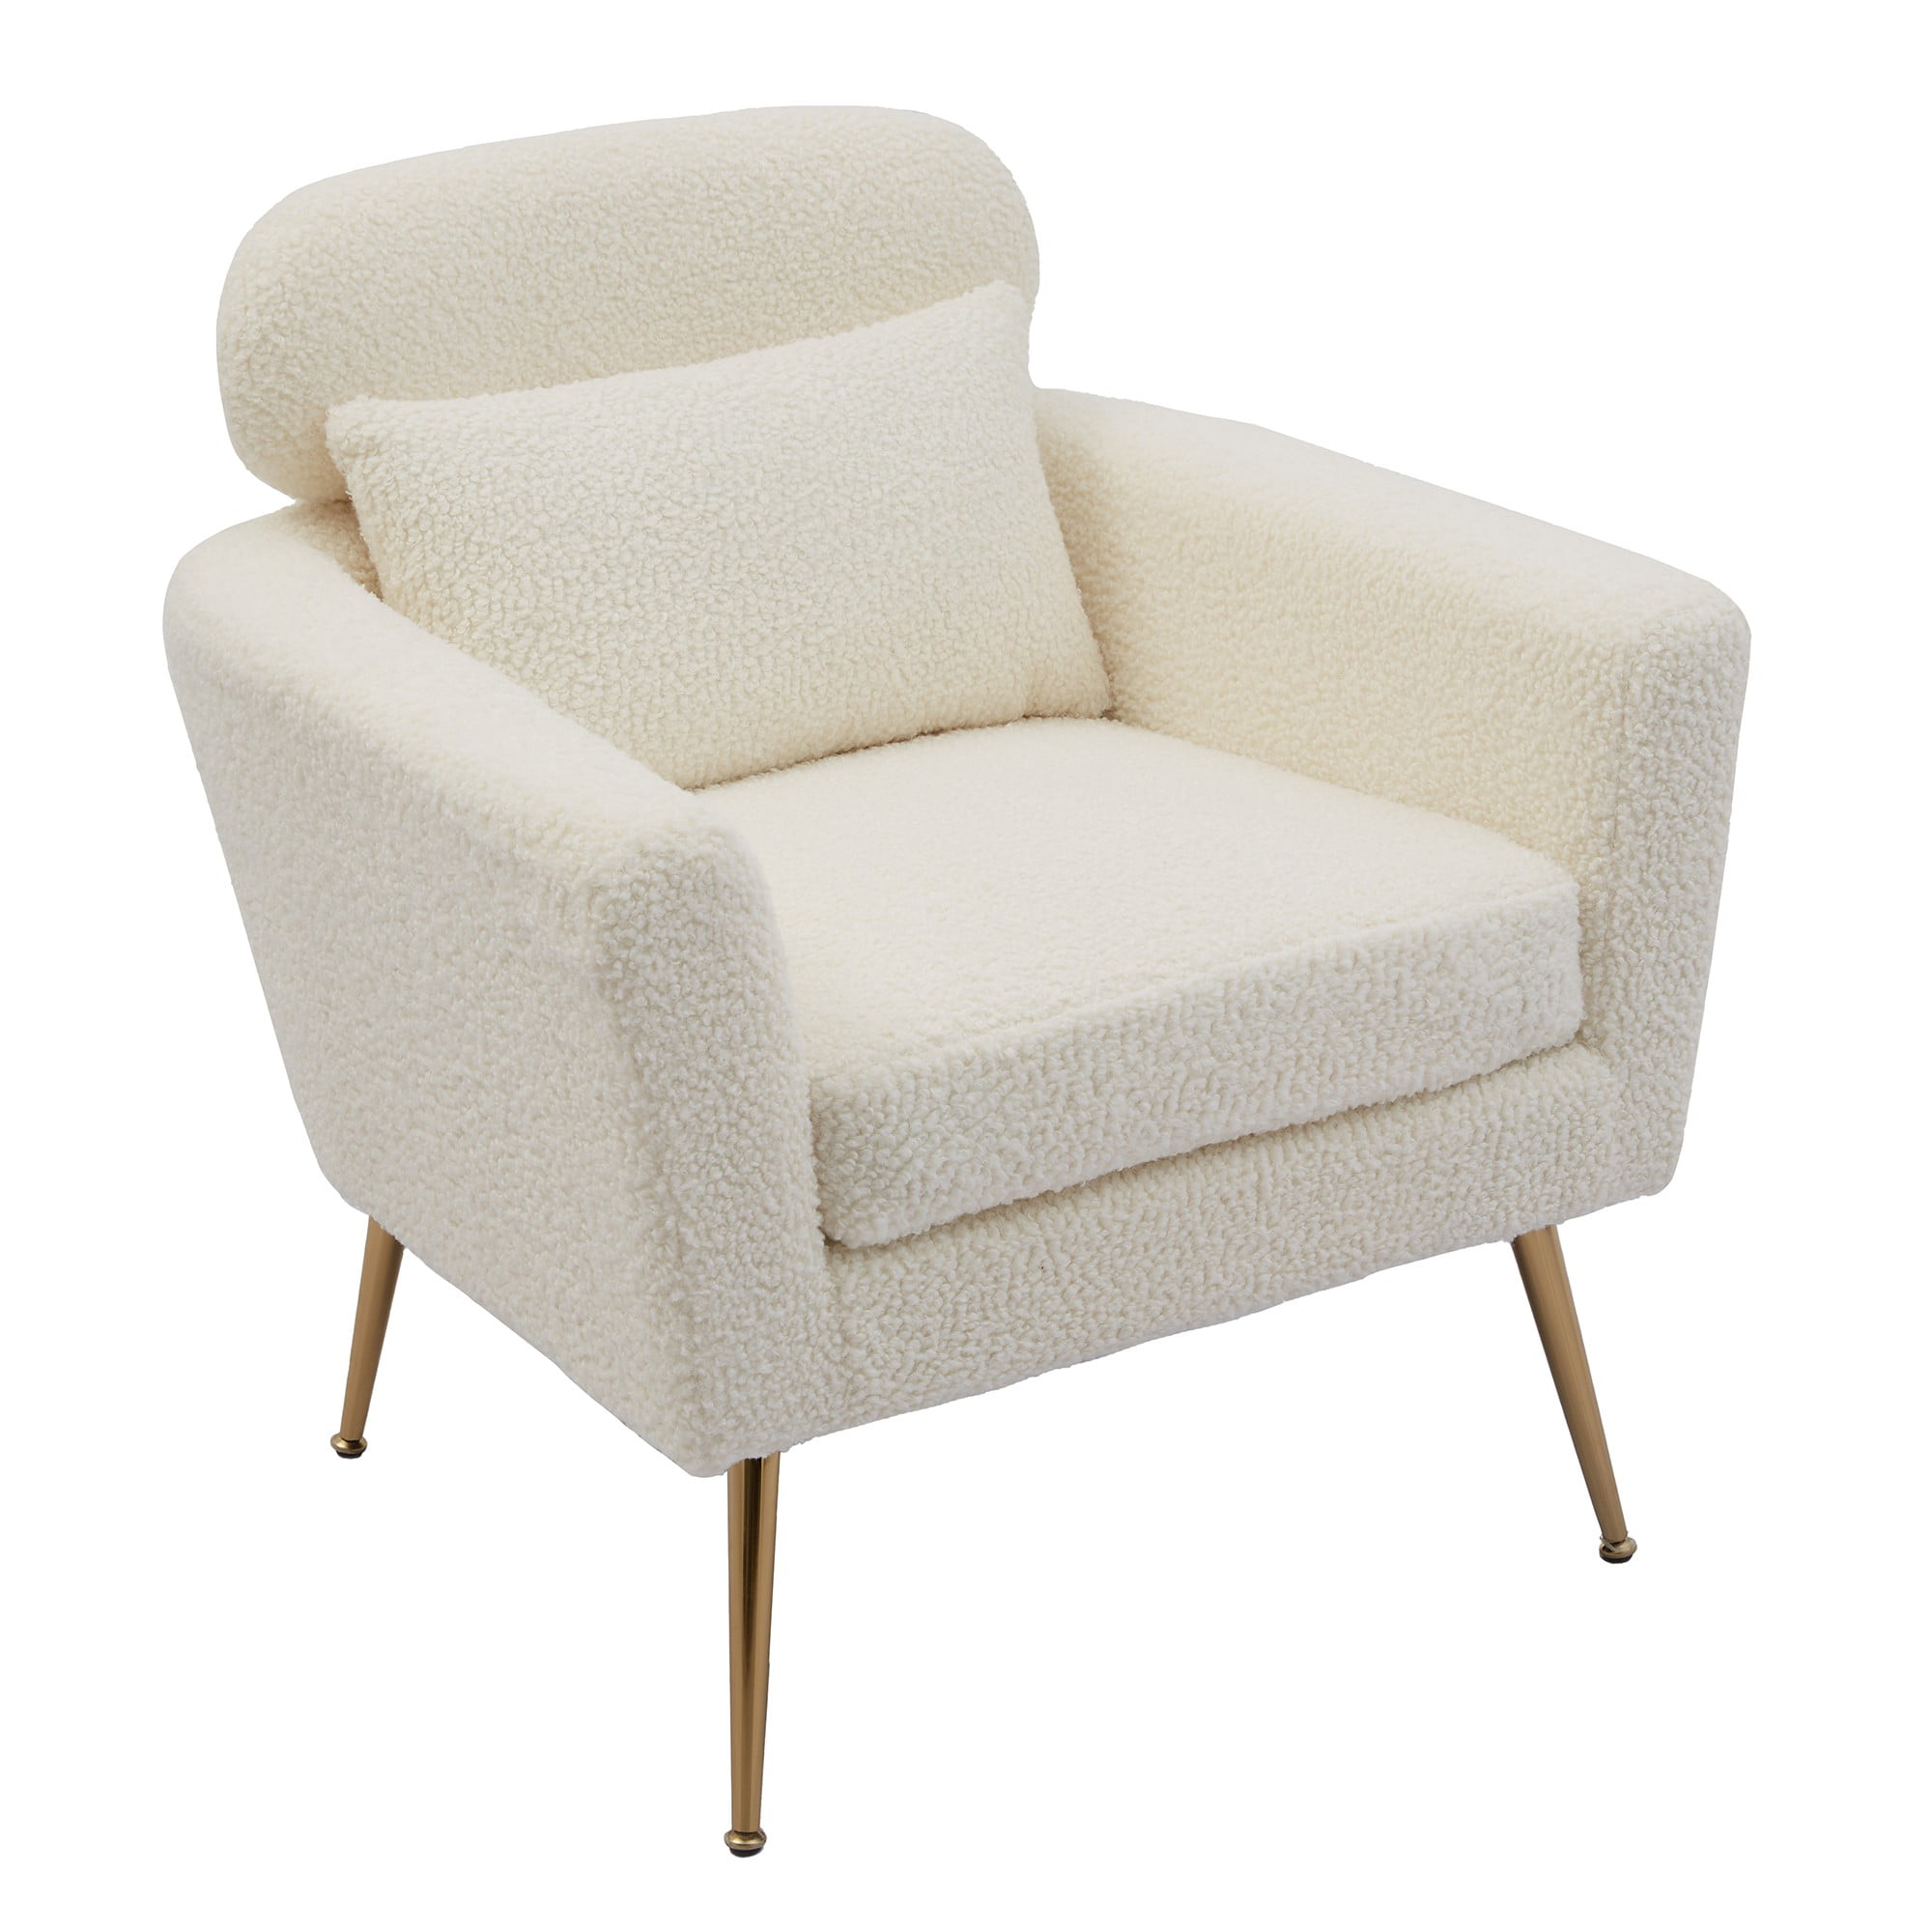 Hommoo Mid Century Modern Accent Chair Comfortable Boucle Fabric Sofa Chair  with Small Pillows Cream Side Chair with Wood Legs Leisure Chair for